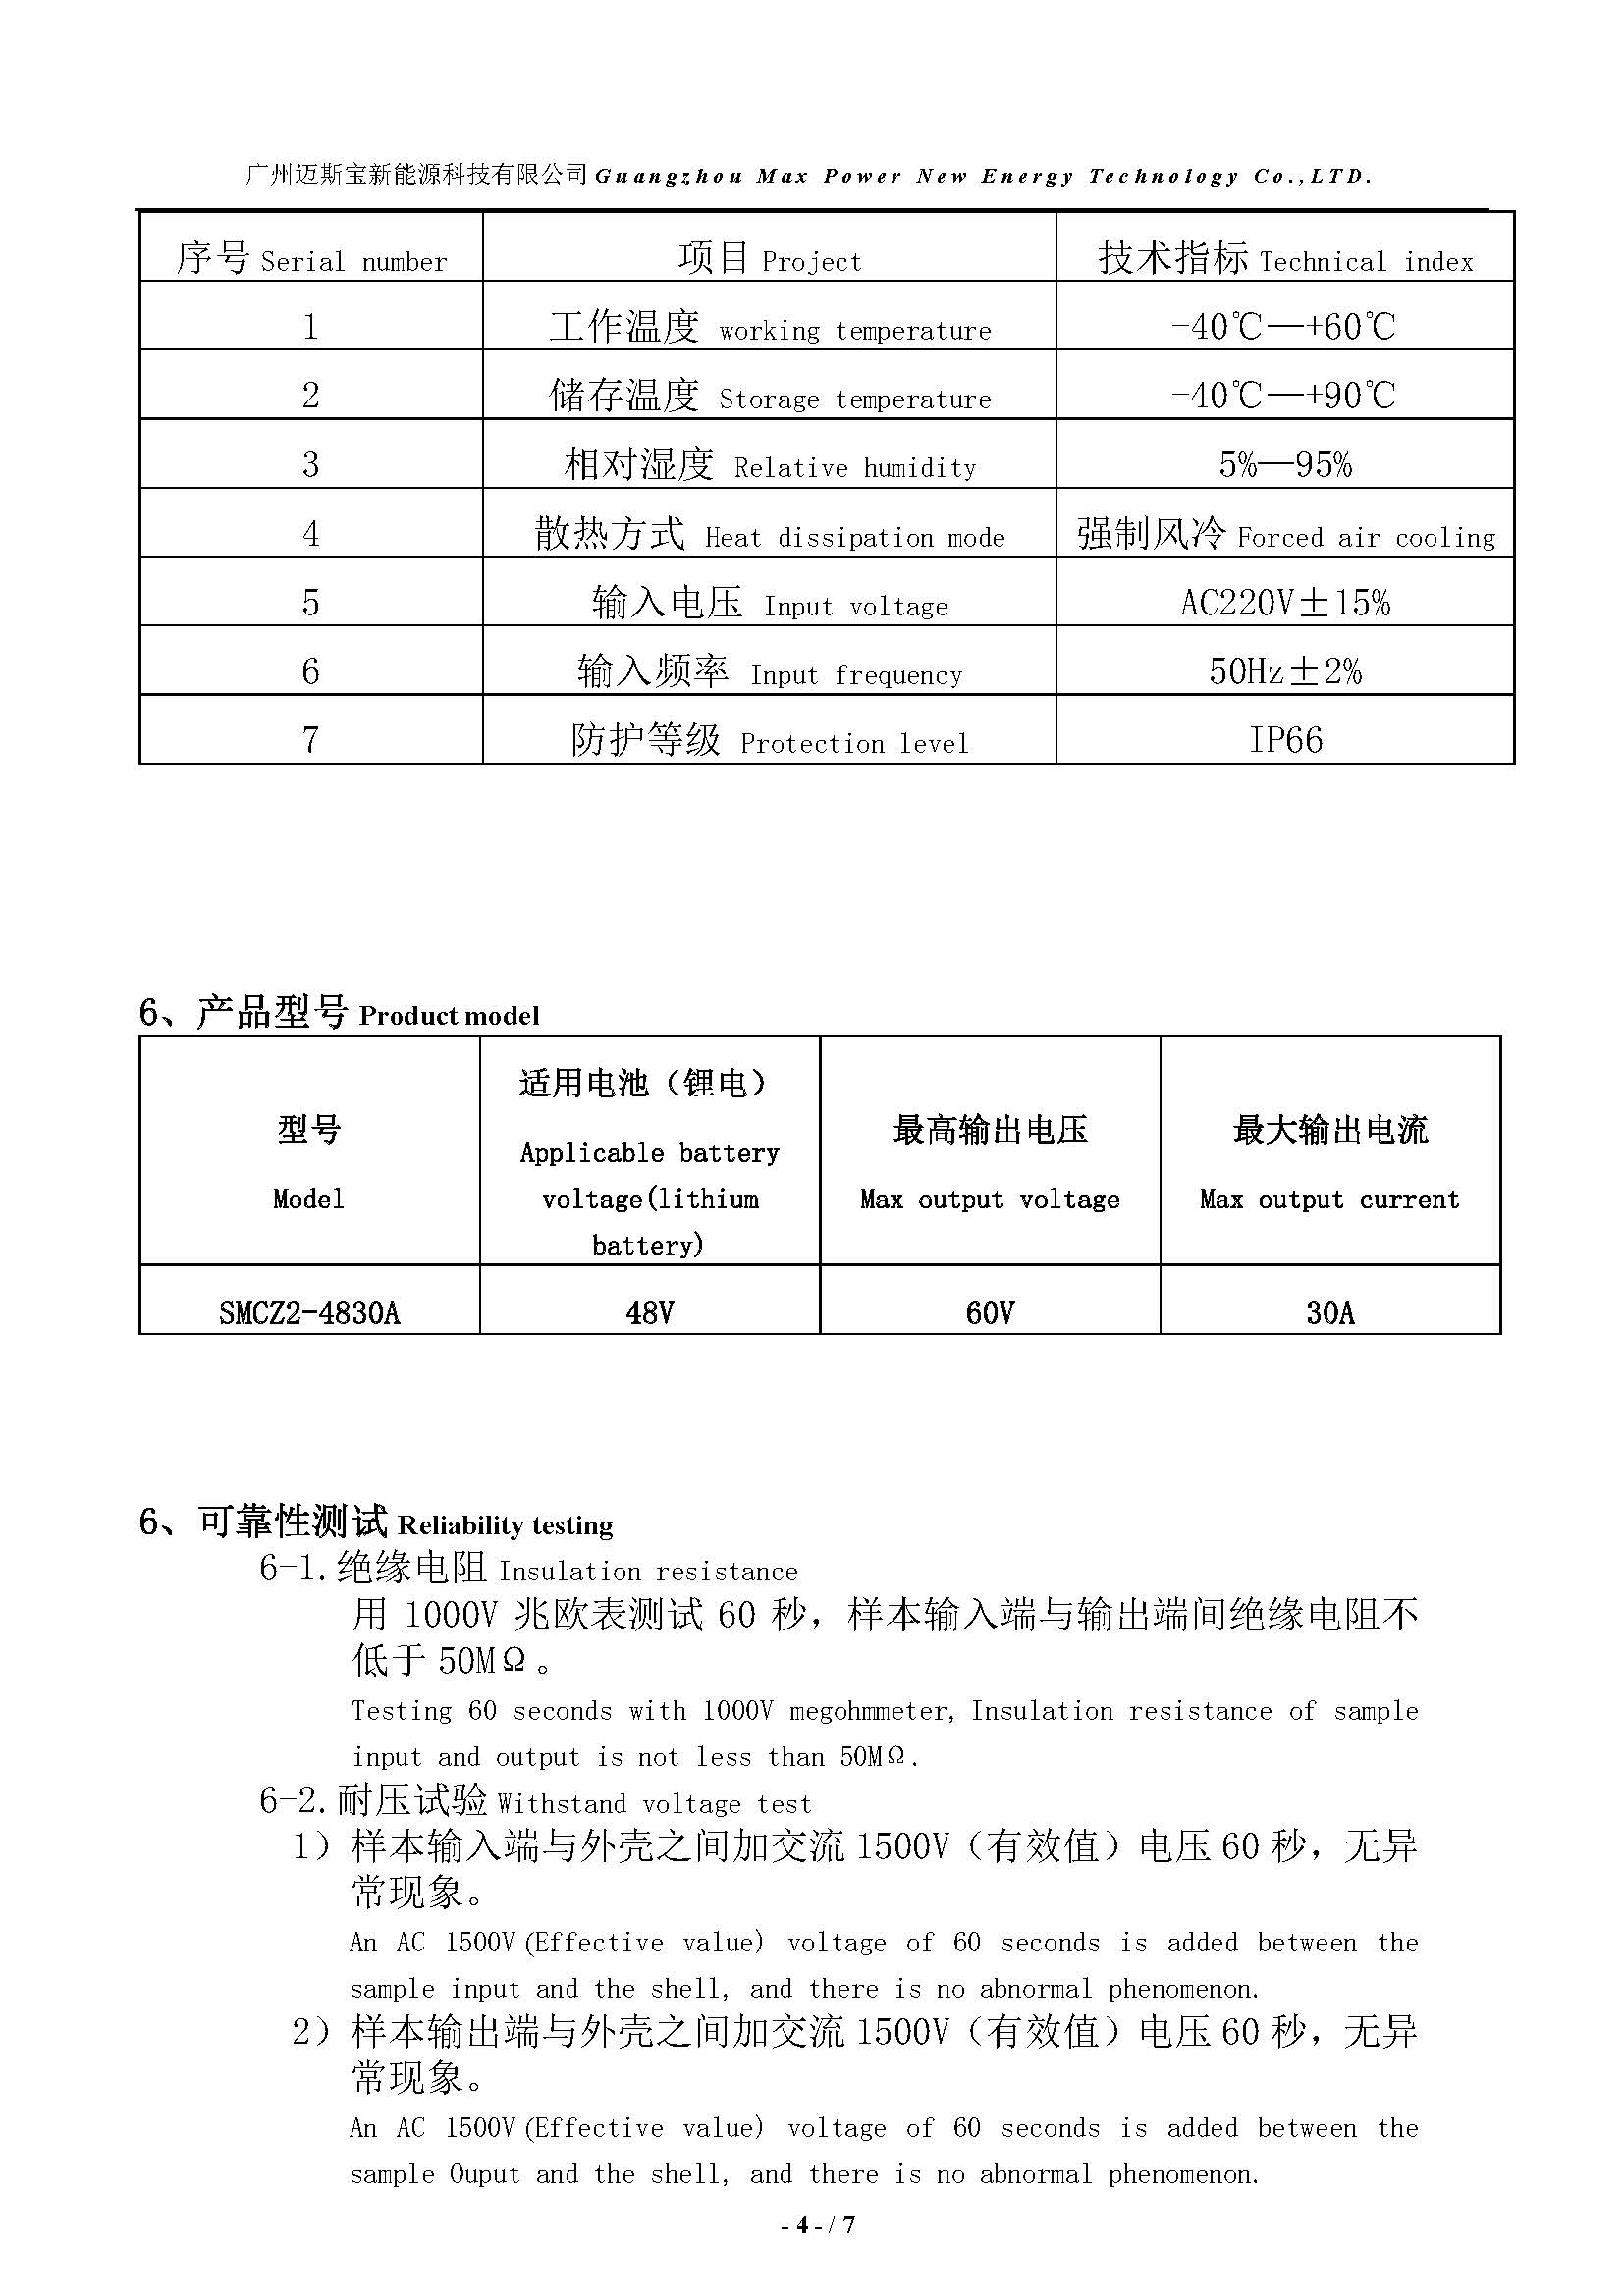 OBC4830_product specification_V1.0_0117_2021_页面_4.jpg